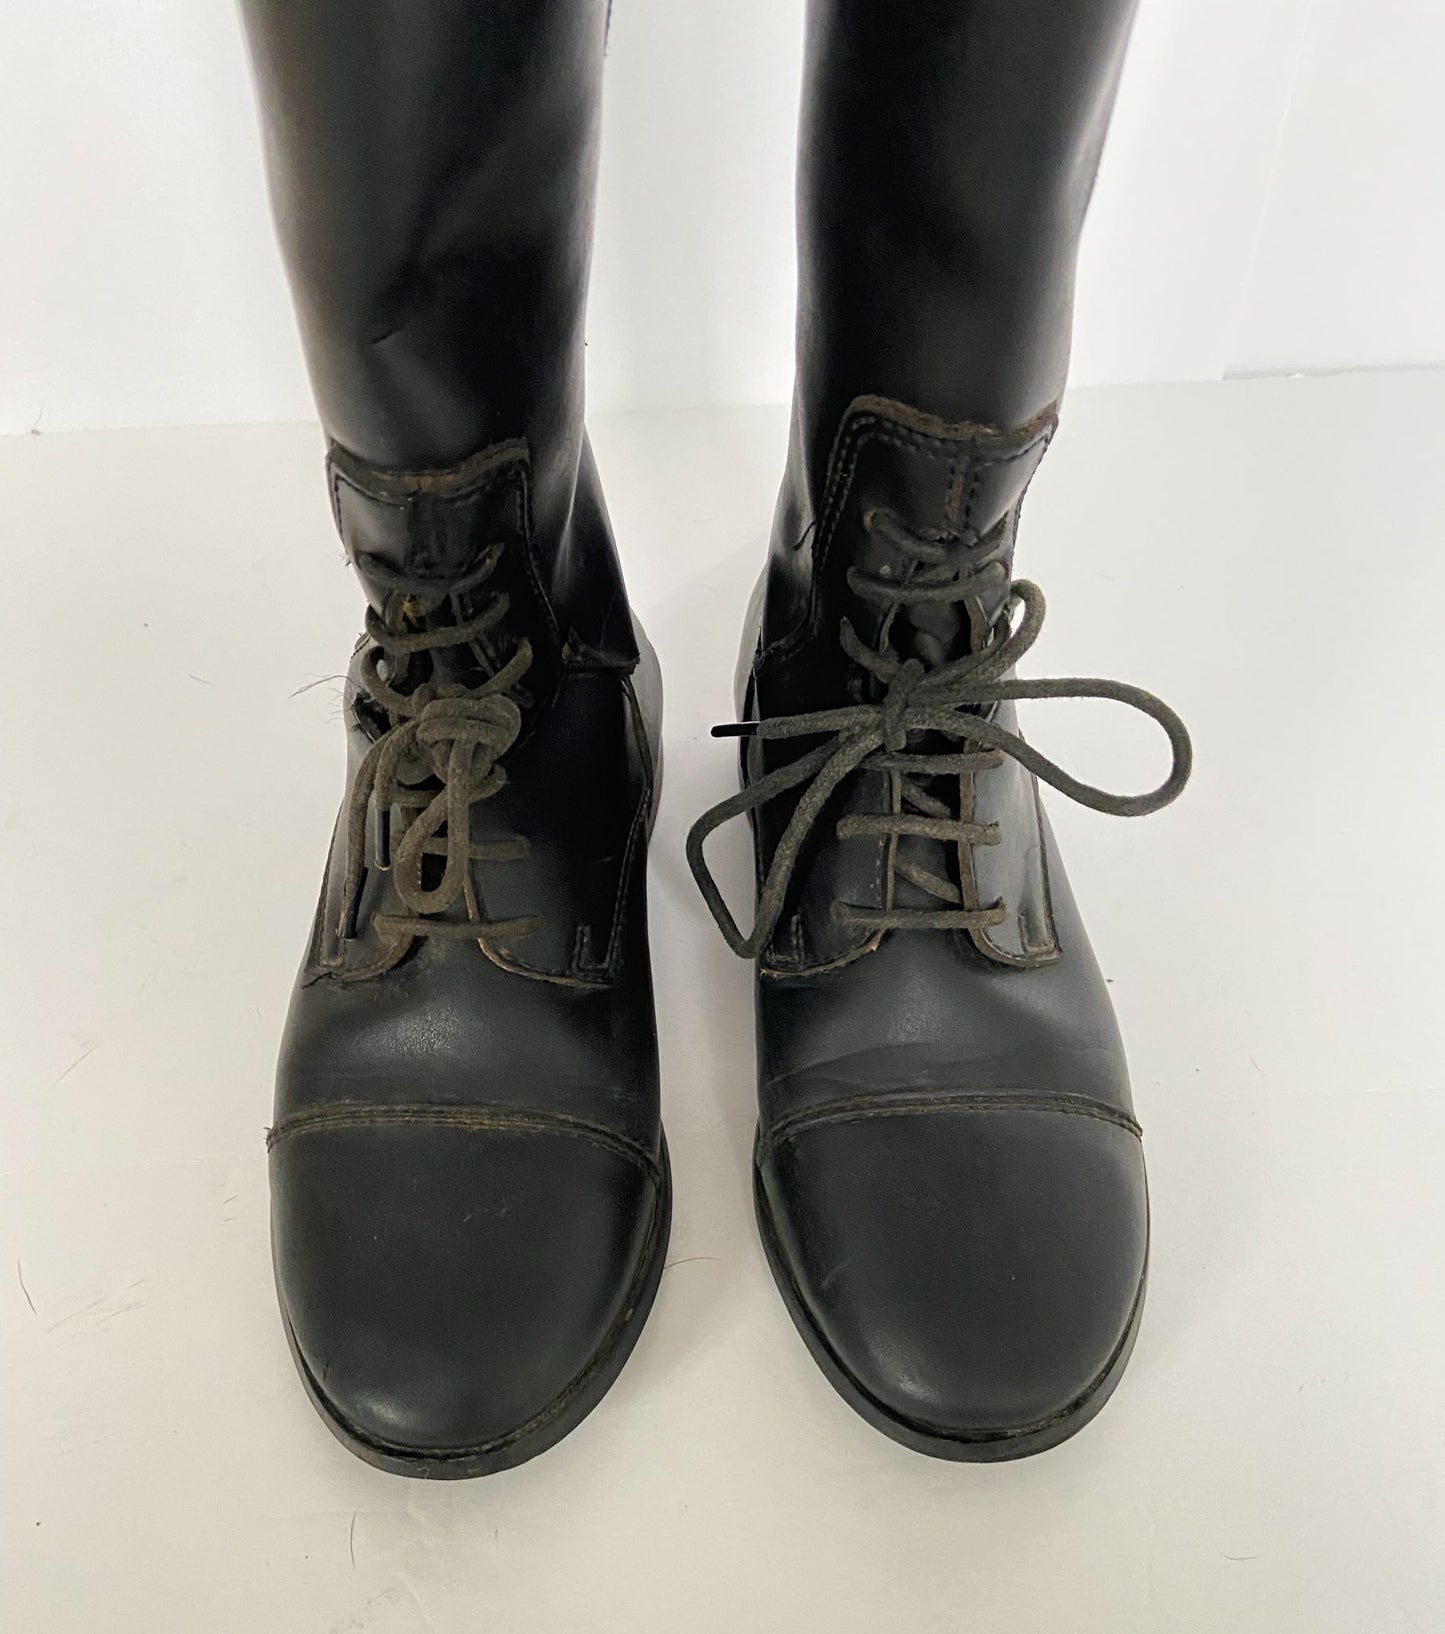 EquiComfort Tall Boot - Black - Youth 3